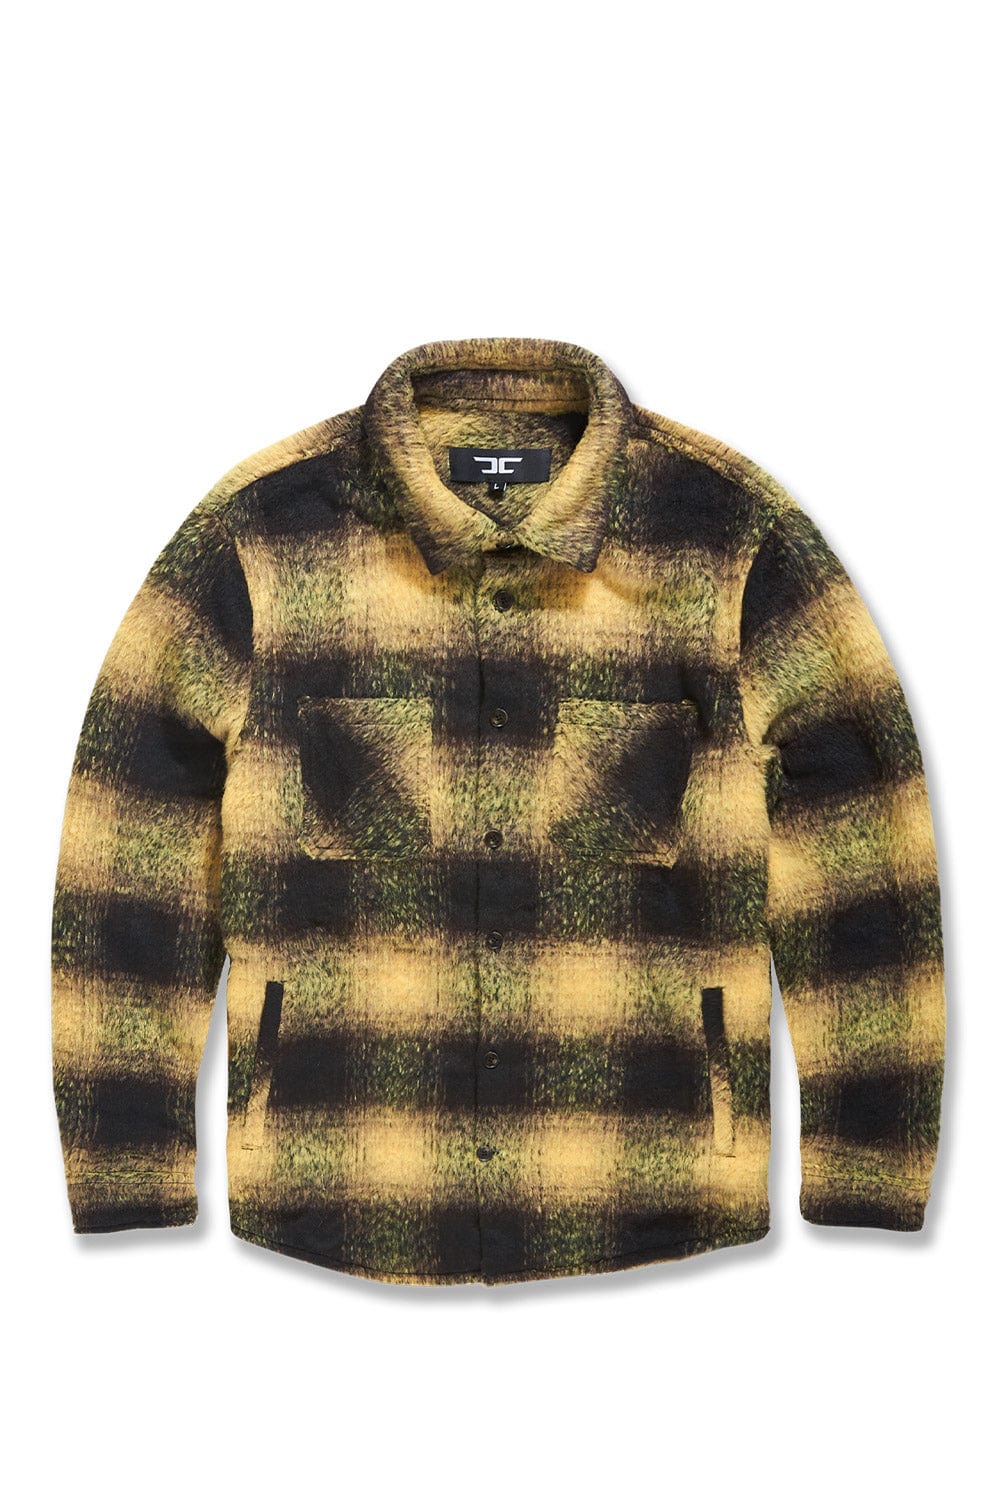 Jordan Craig See You In Paradise Flannel Shacket (Yellow) S / Yellow